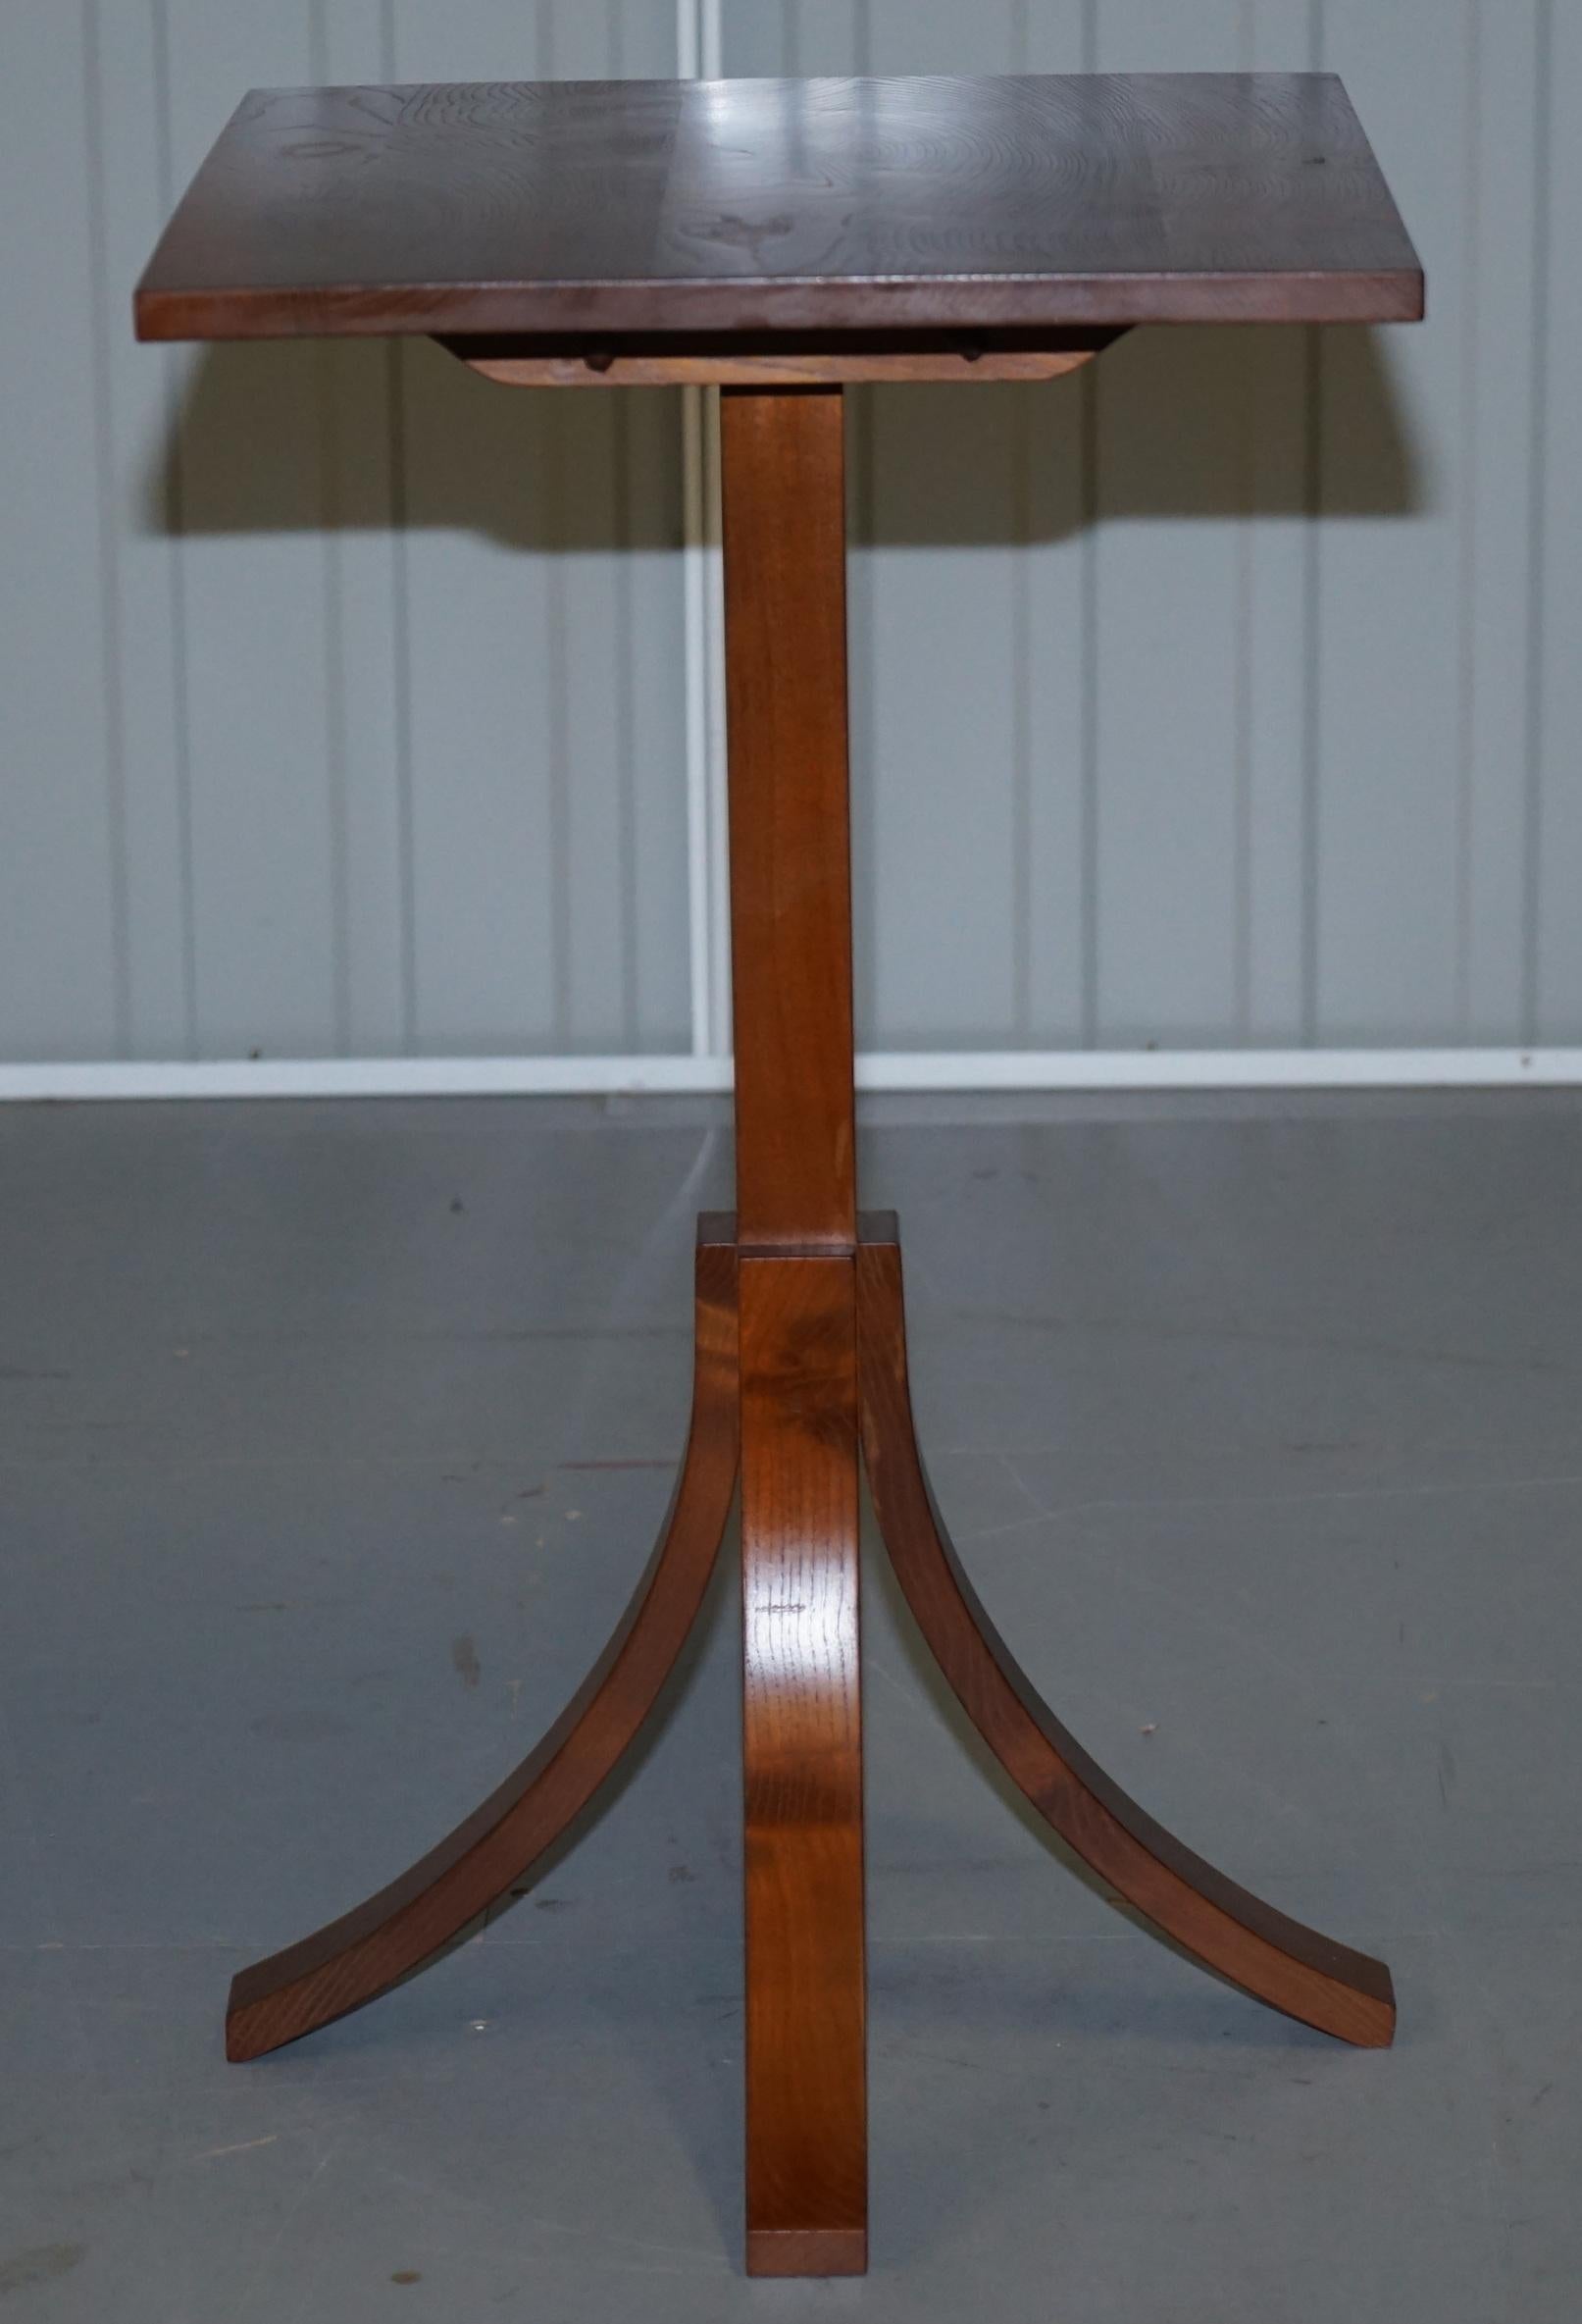 Stunning Mulberry Furniture Made by Holgate & Pack Designer Walnut Side Table For Sale 7